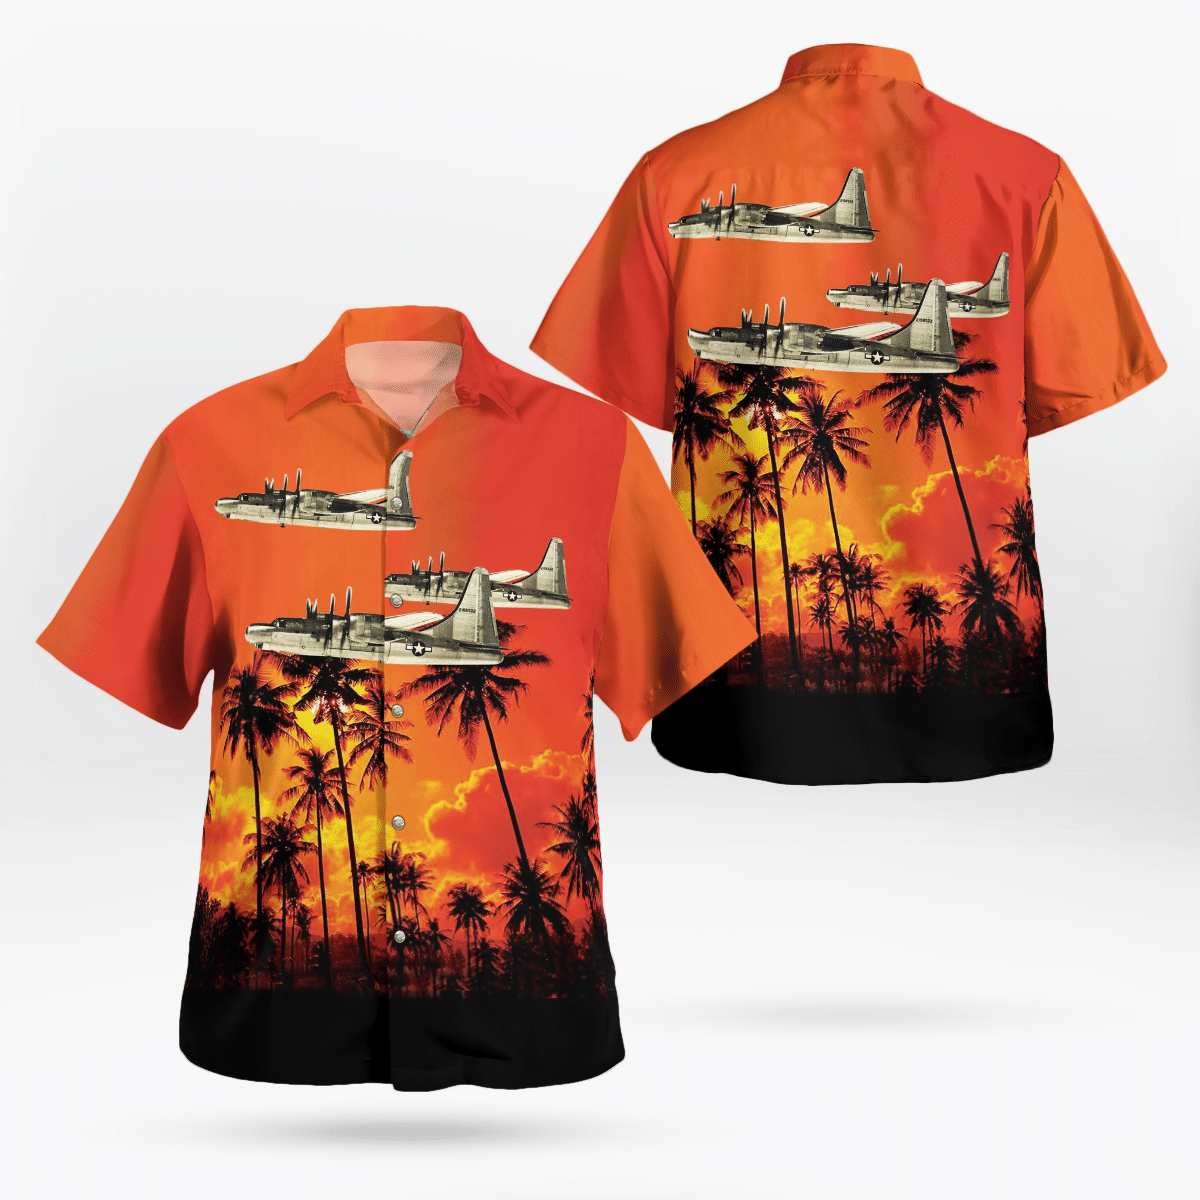 Shop now to find the perfect Hawaii Shirt for your hobby 92